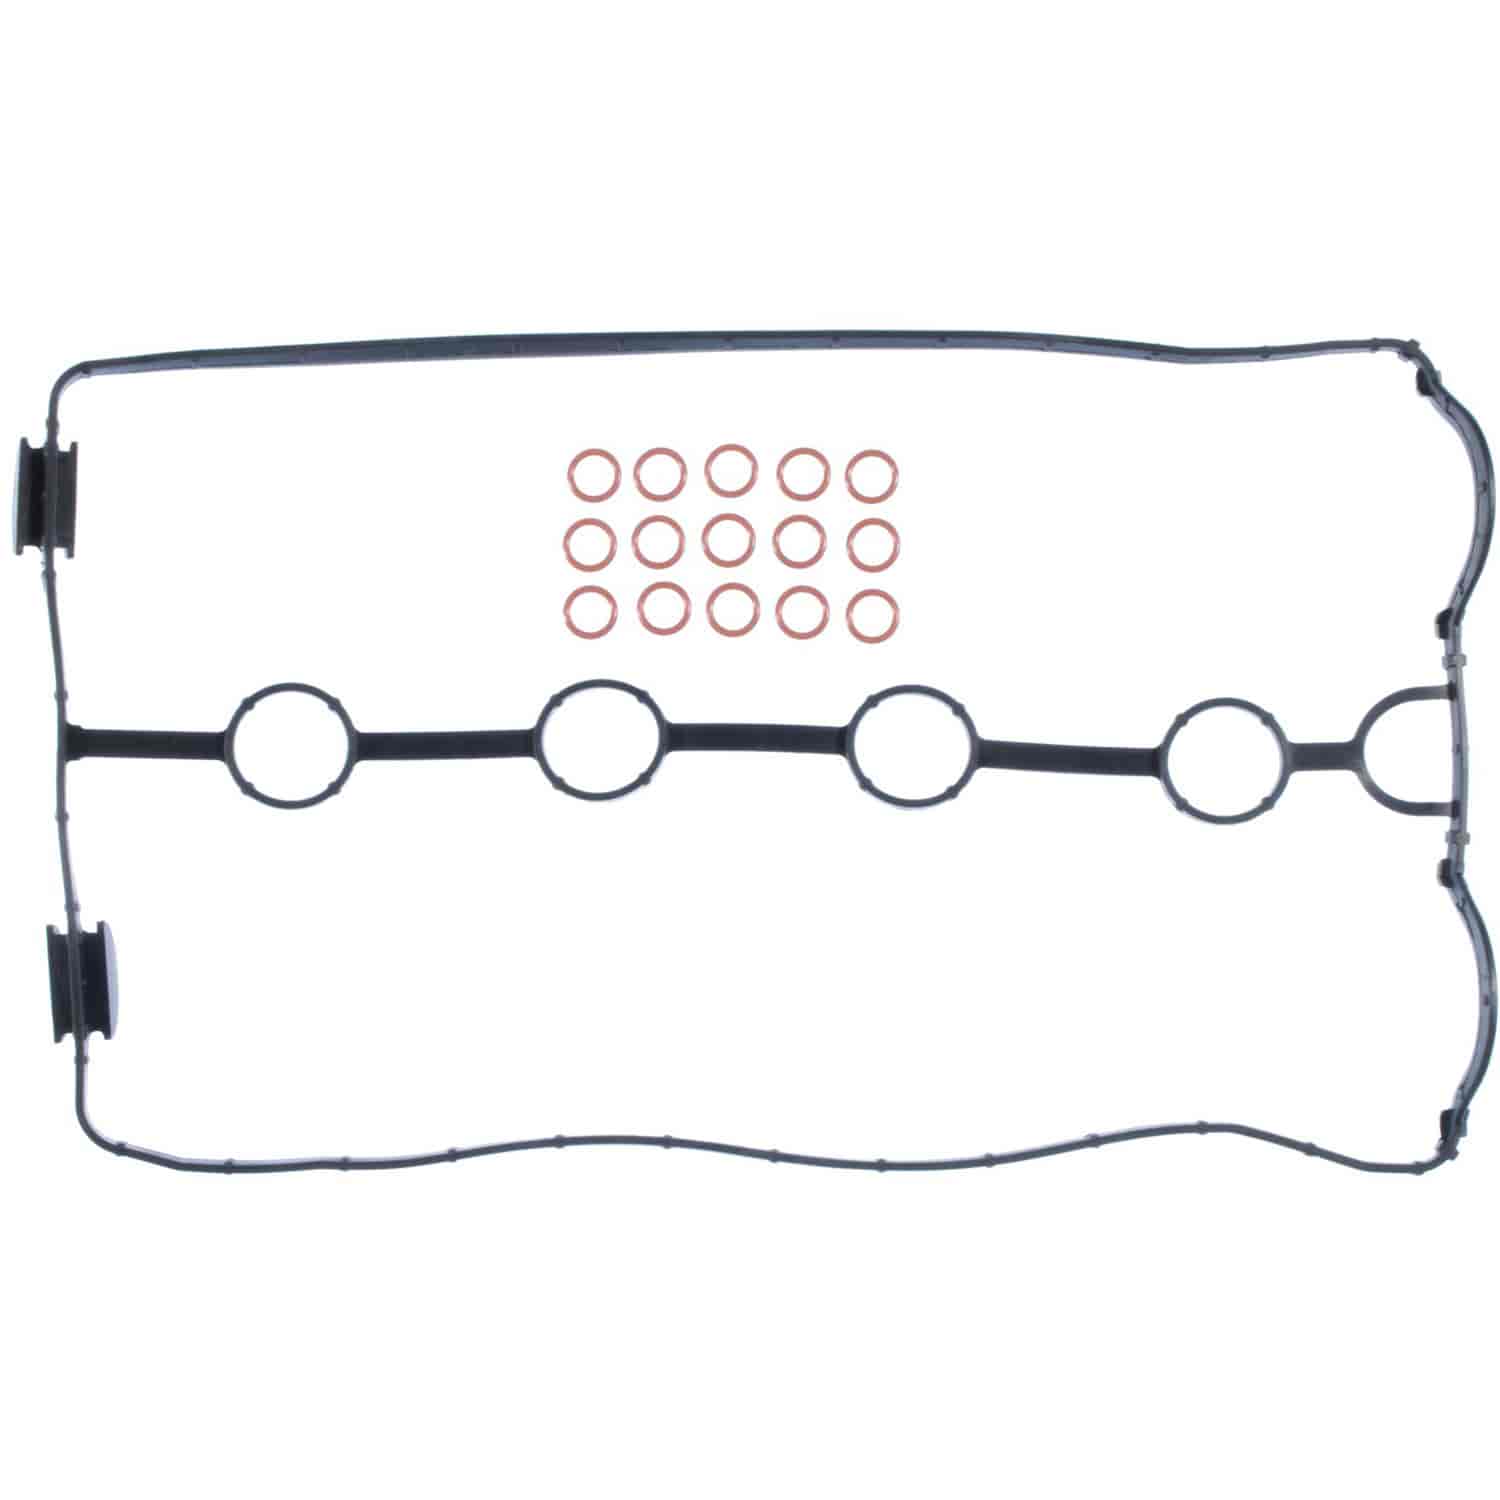 Valve Cover Gasket Set 2004-2008 Chevy Aveo 1.6L in Molded Rubber